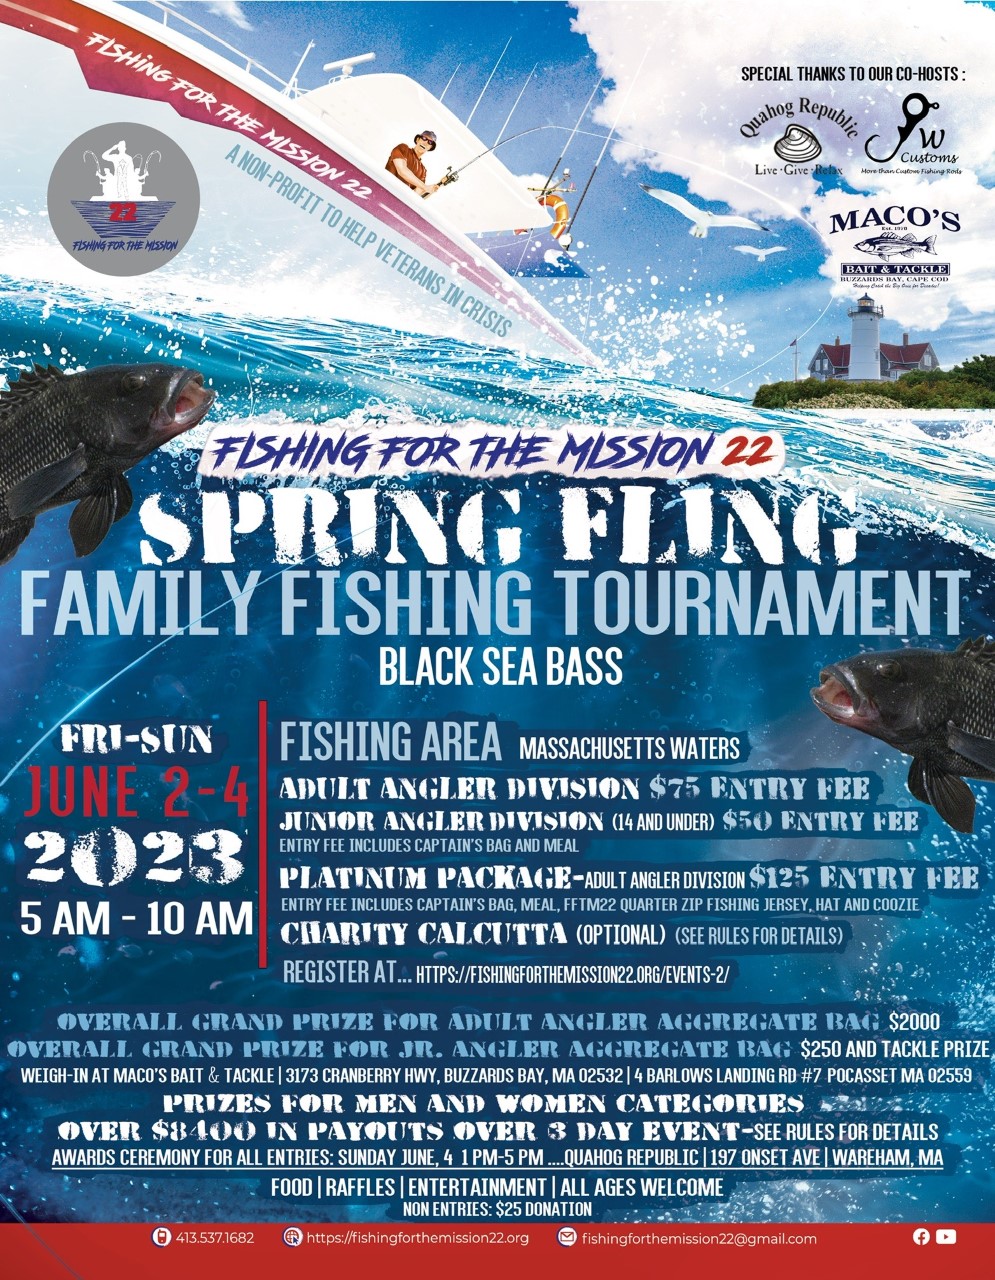 Fishing for the Mission: Black Sea Bass Family Fishing Tournament